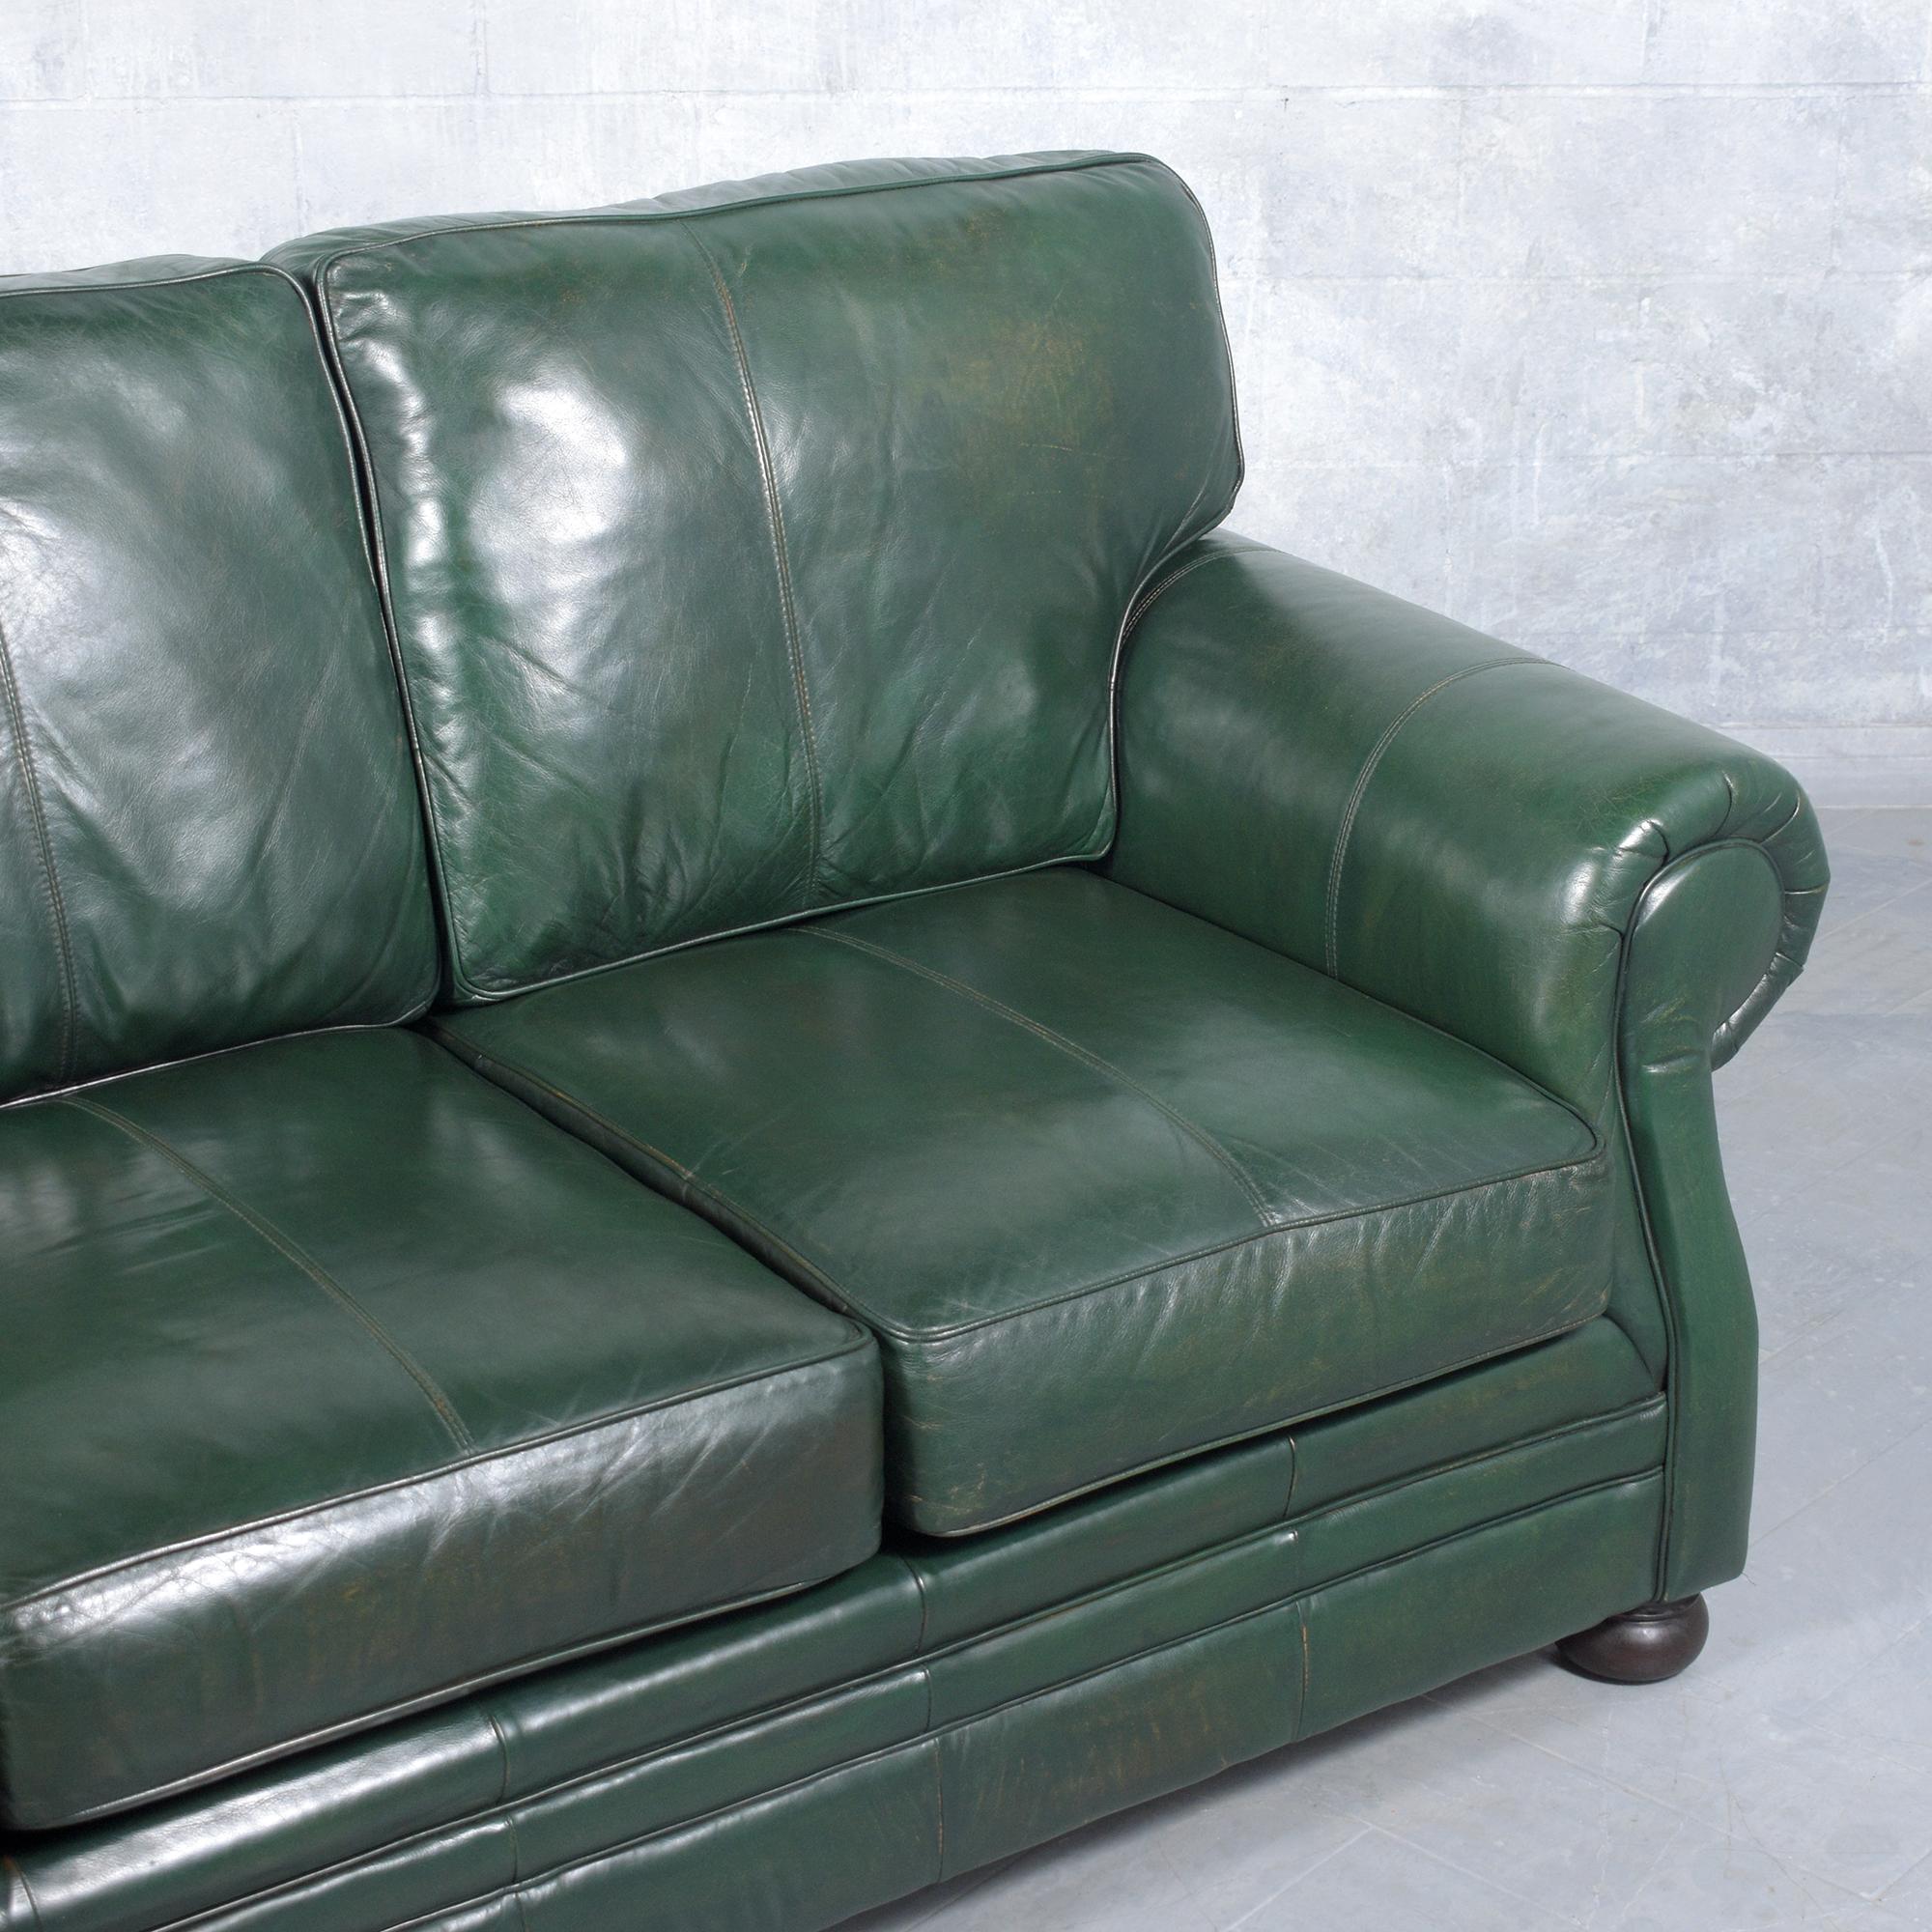 Restored 1980s Vintage Leather Sofa in Dark Green with Carved Bun Legs For Sale 2